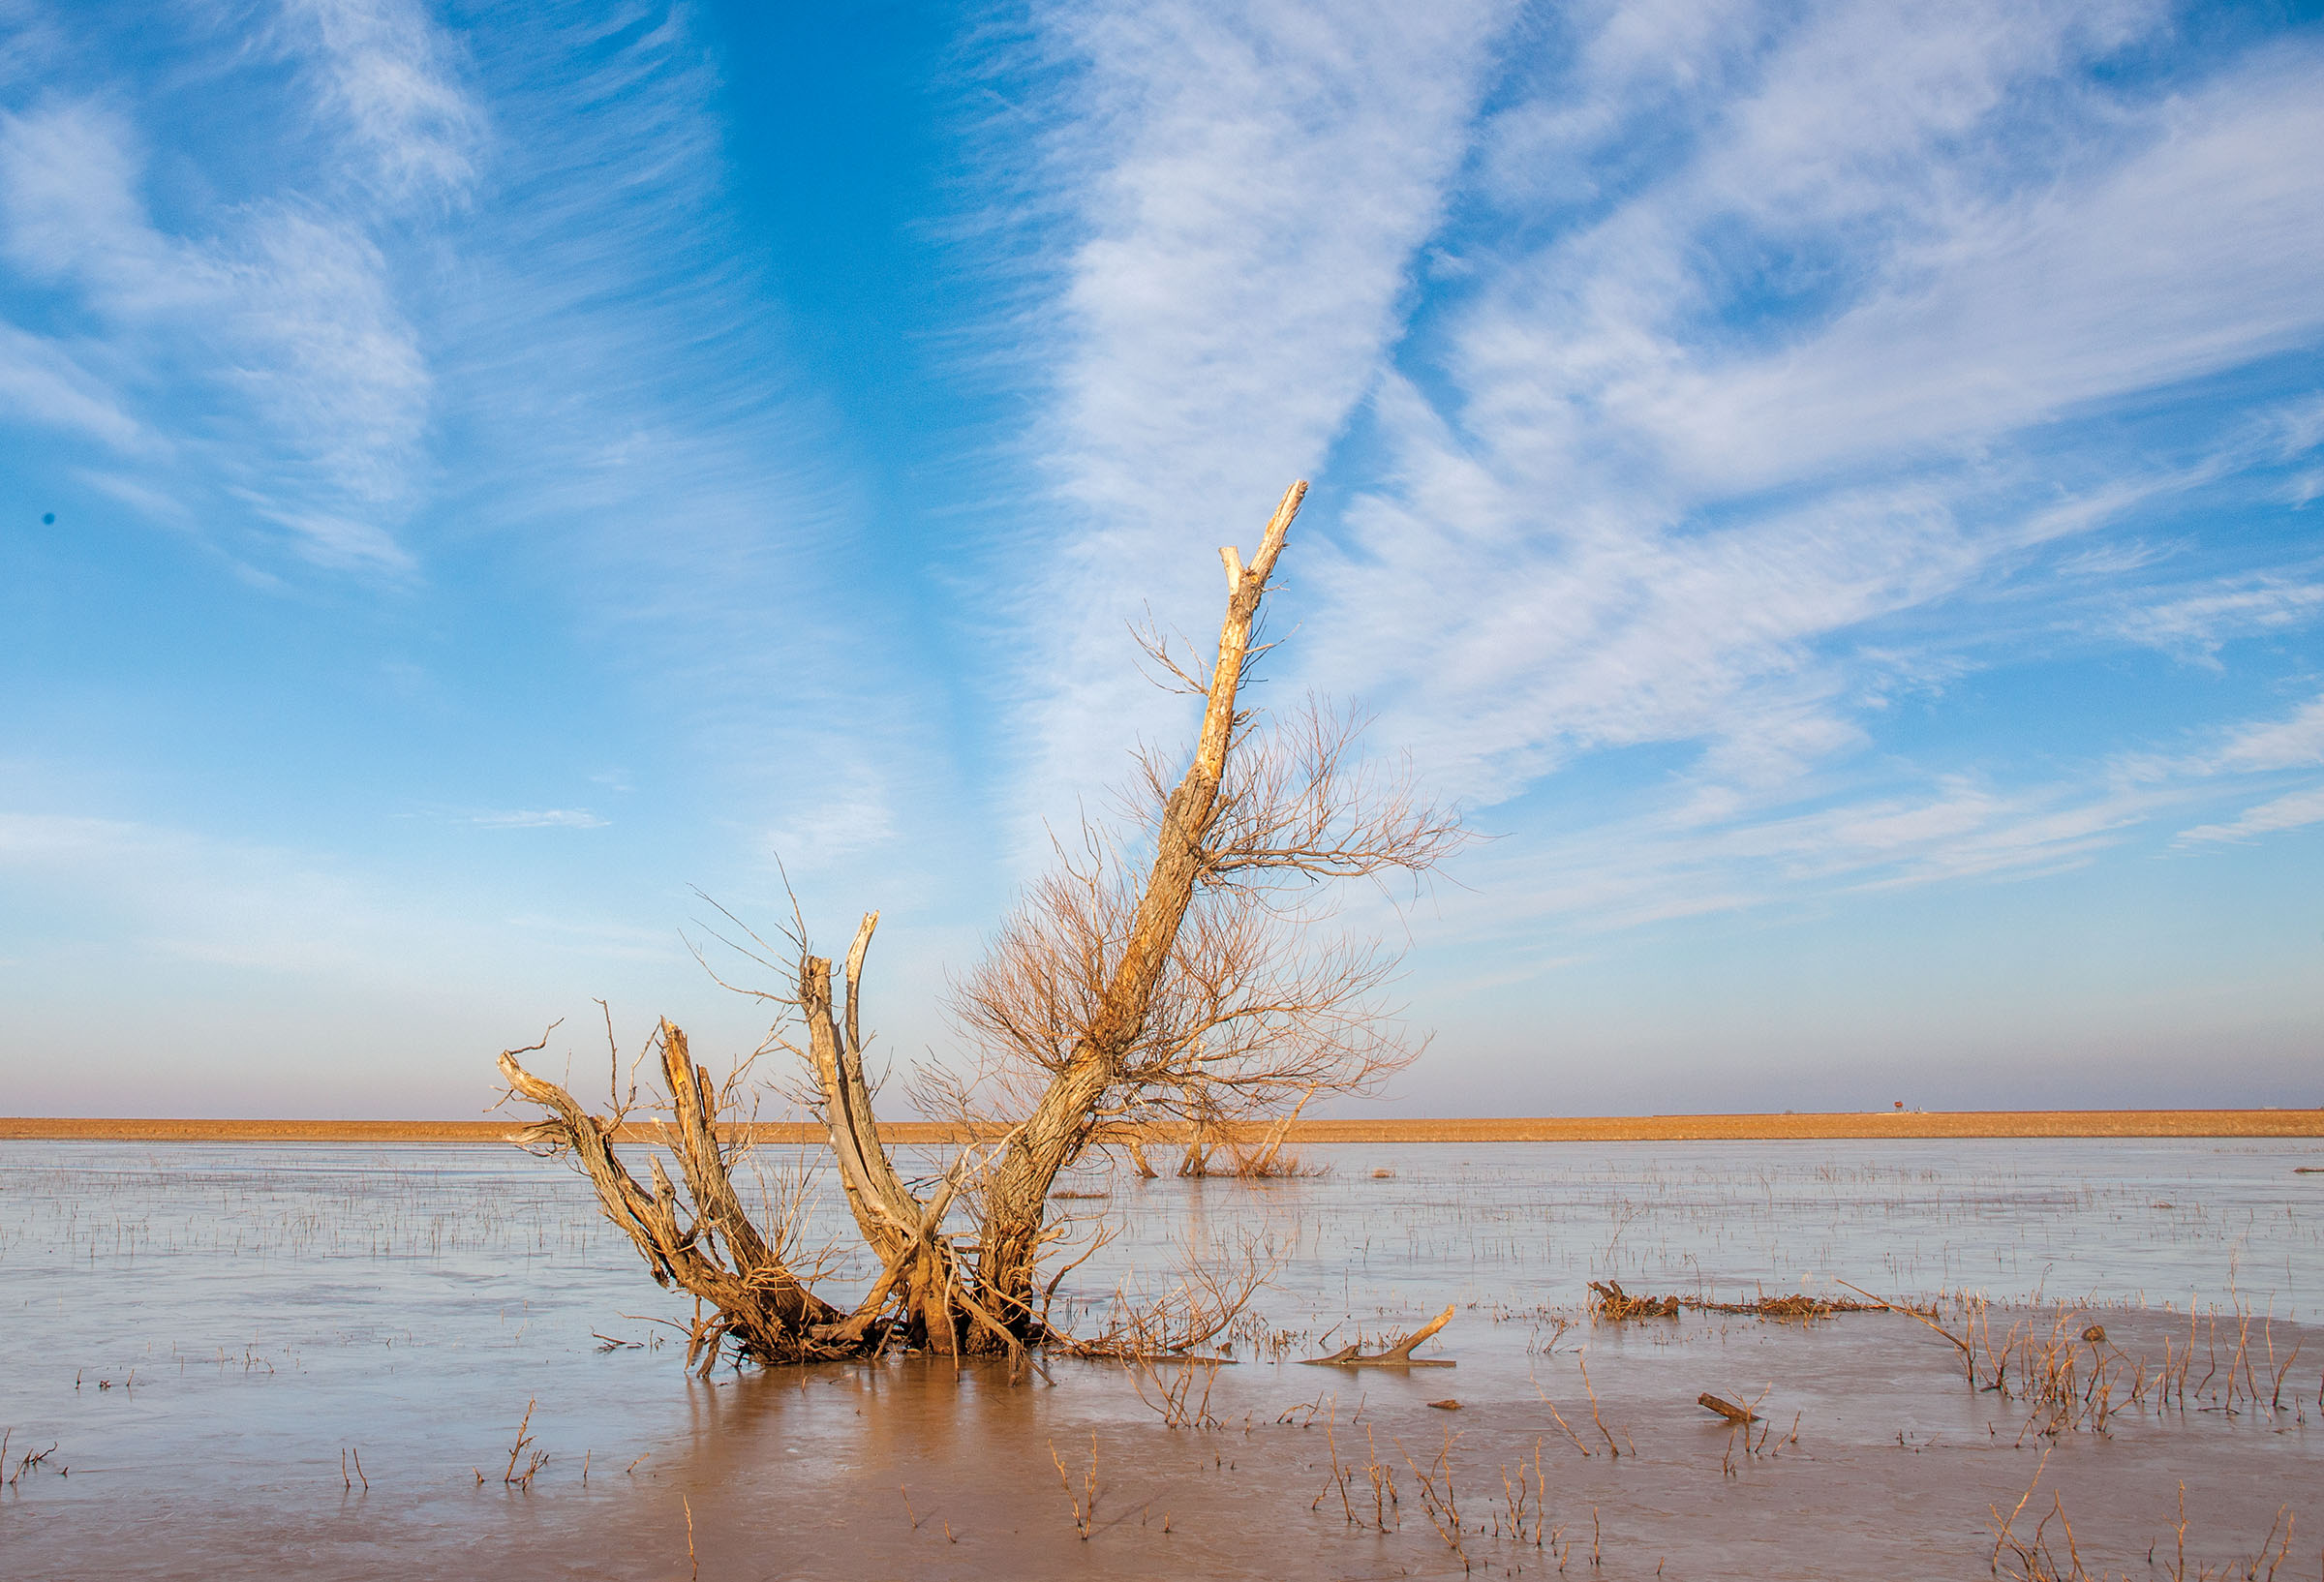 A large root structure grows out of shallow, murky water under blue sky with clouds